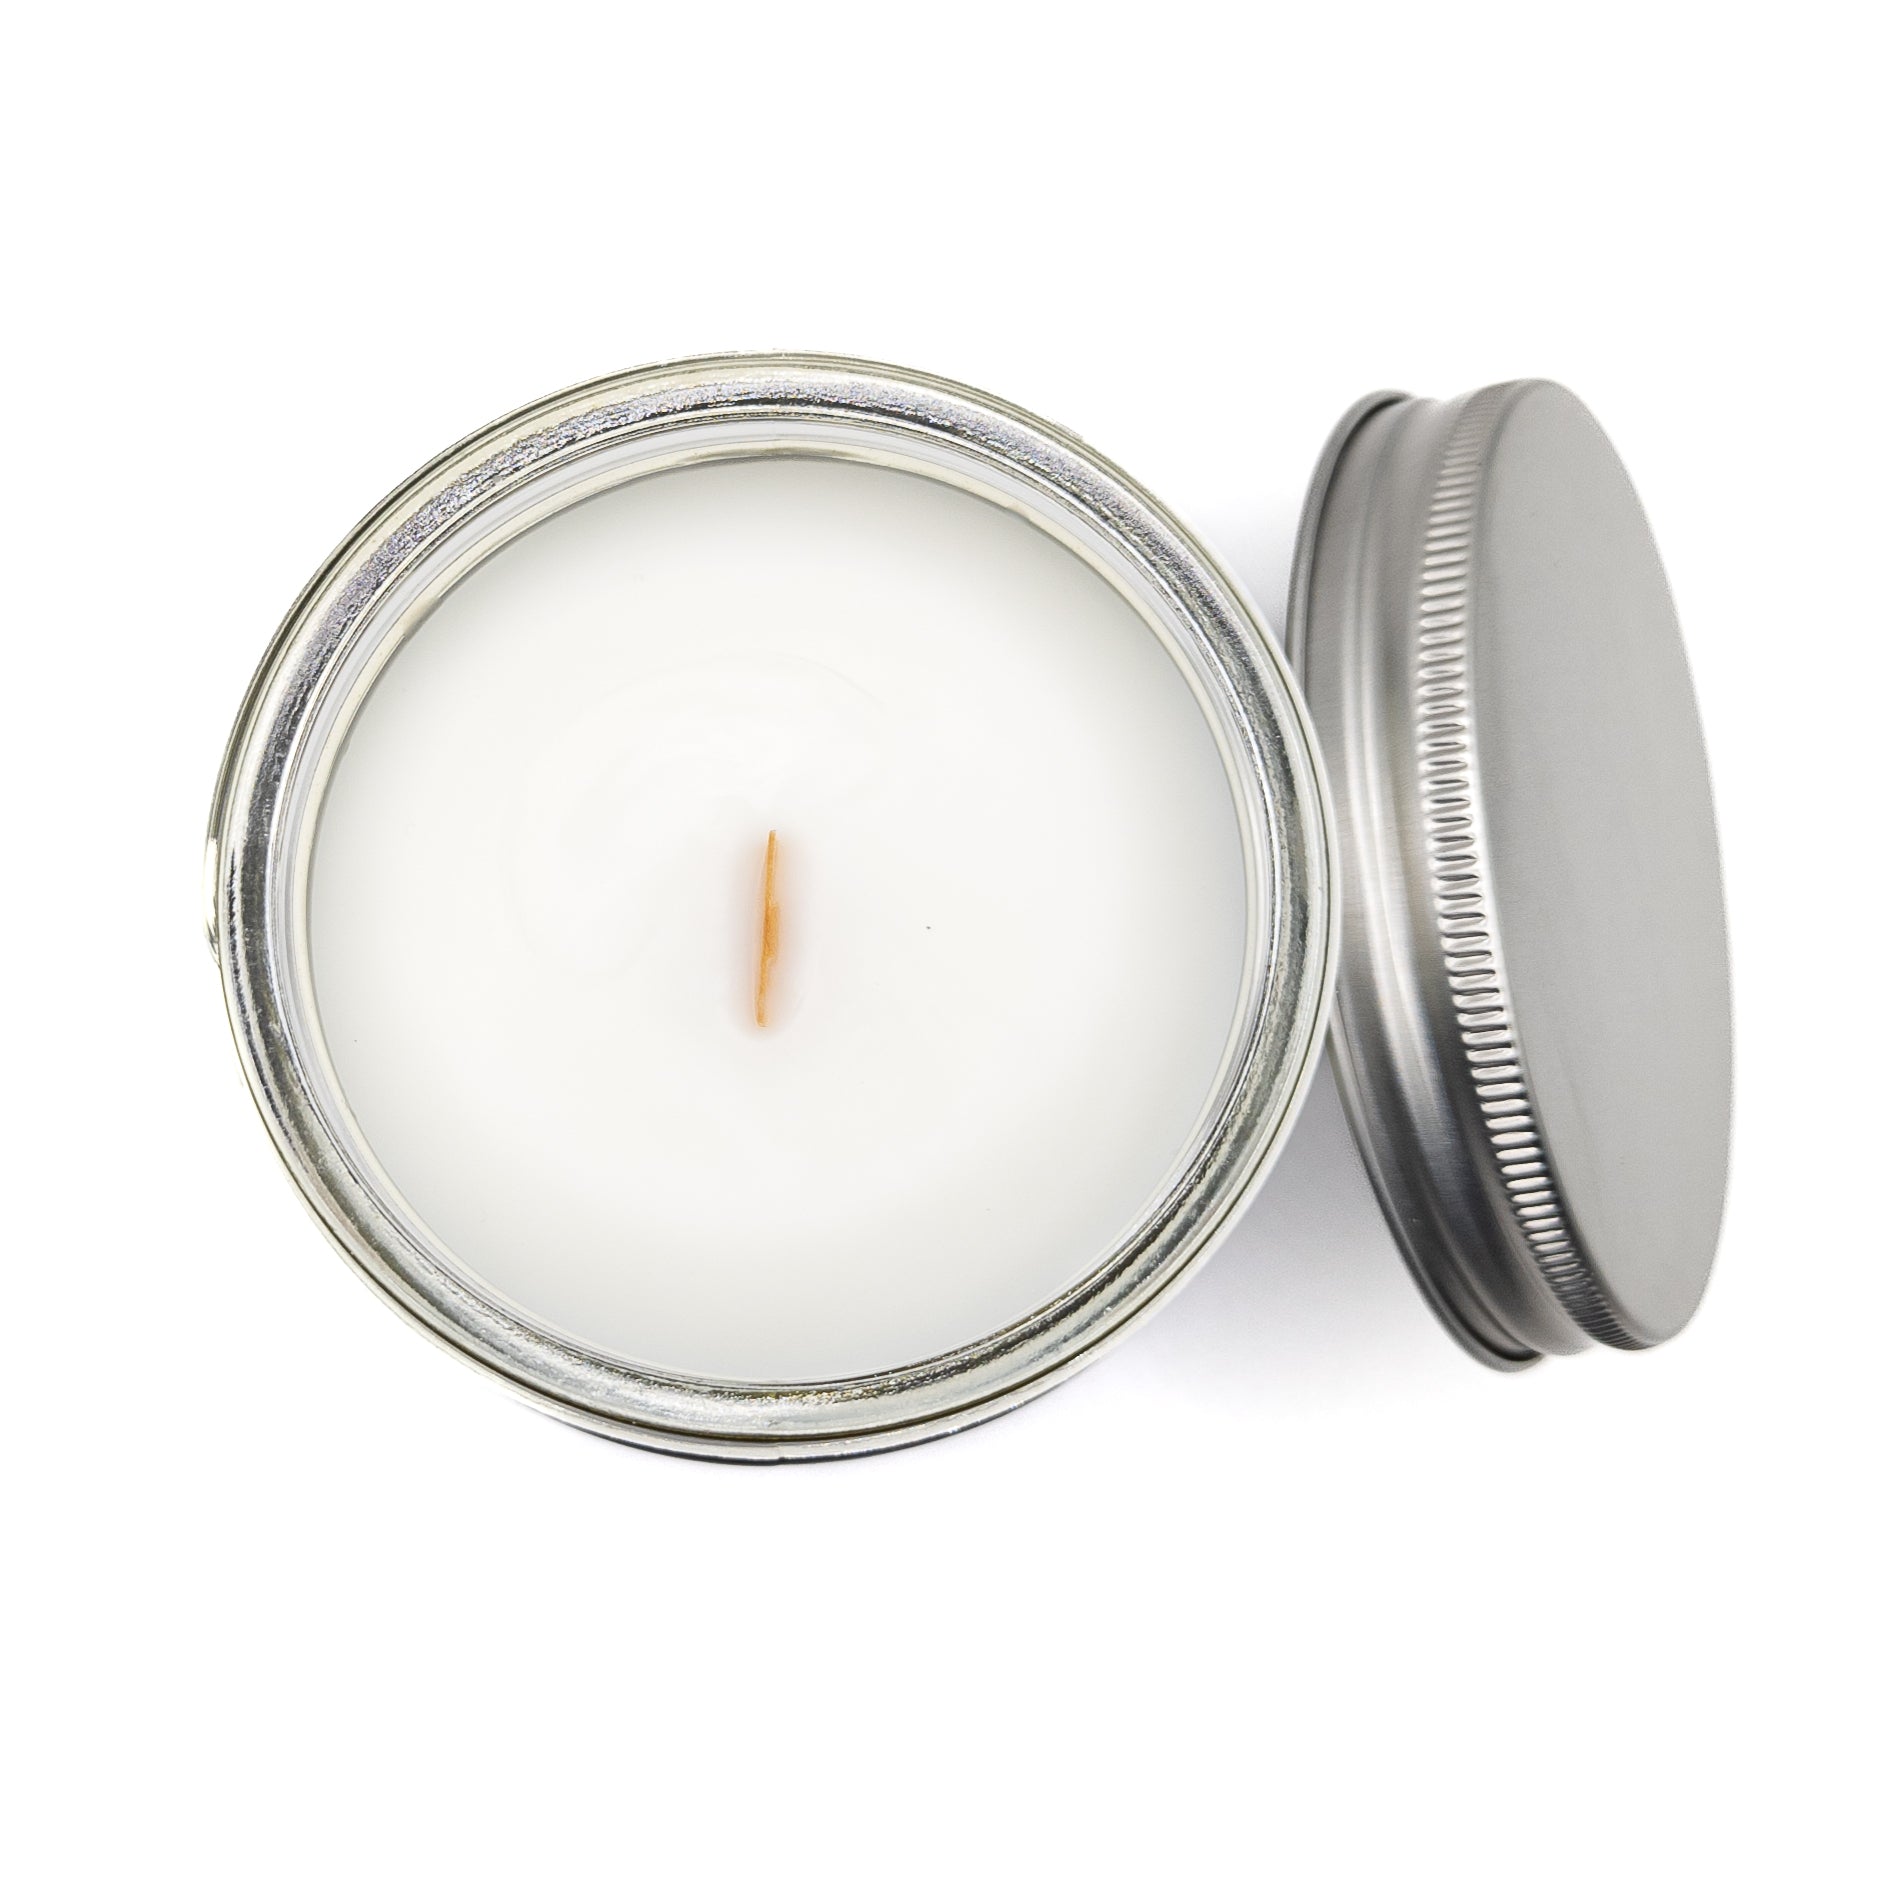 Luxury blend coconut wax with crackling wooden wick